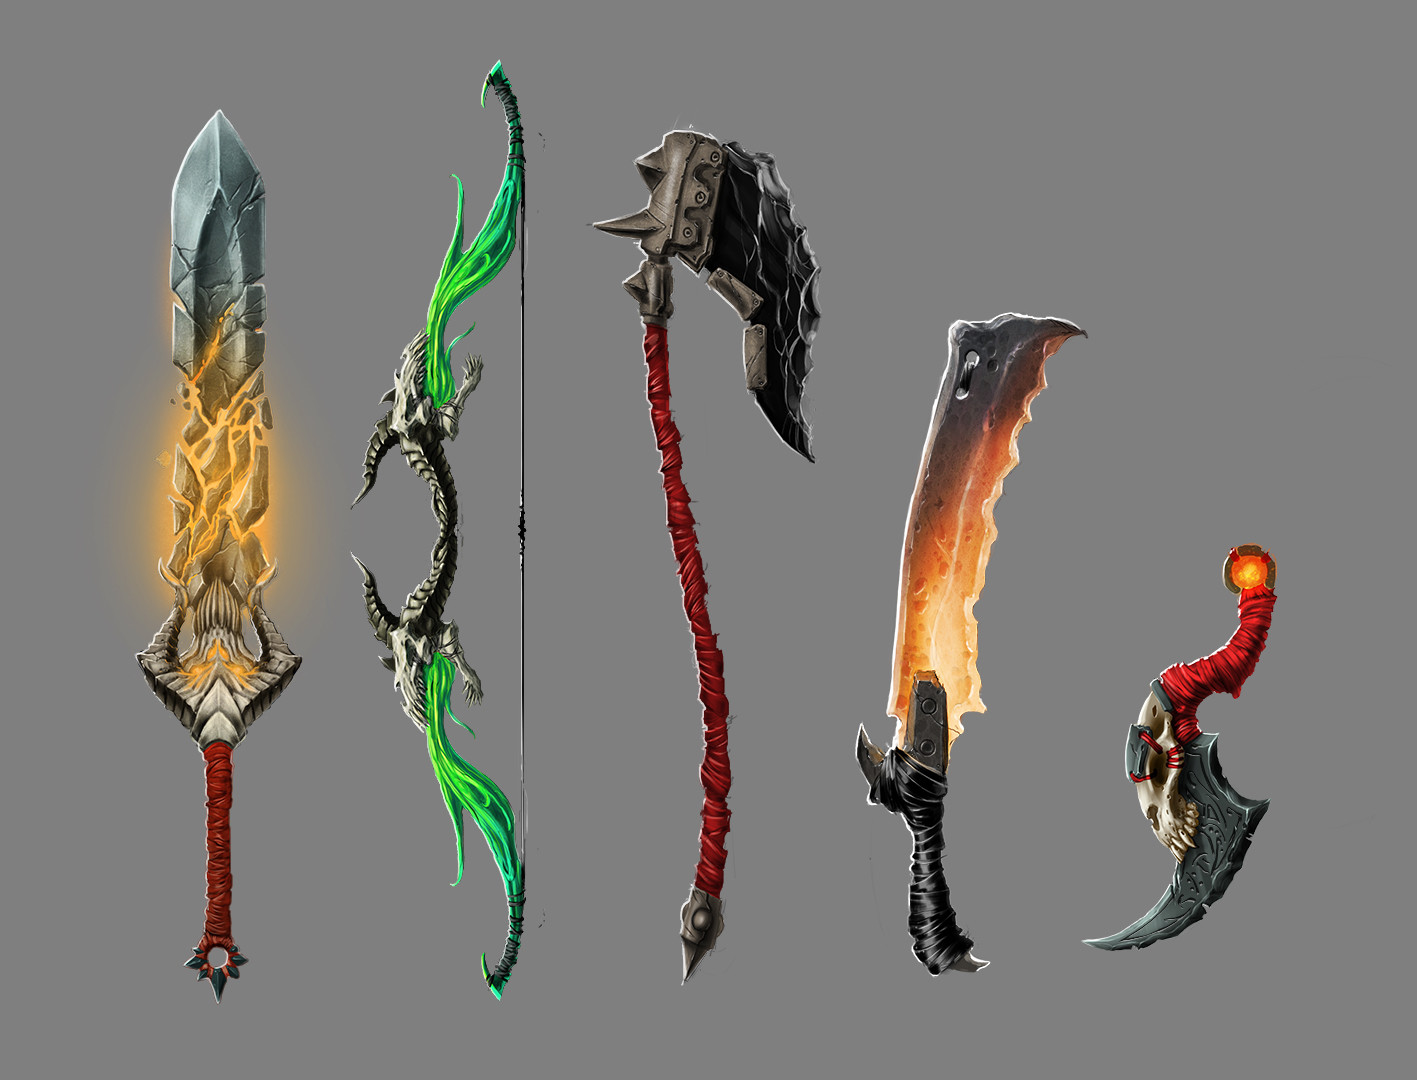 Concepts for all weapons. Zbrush Modeling next.